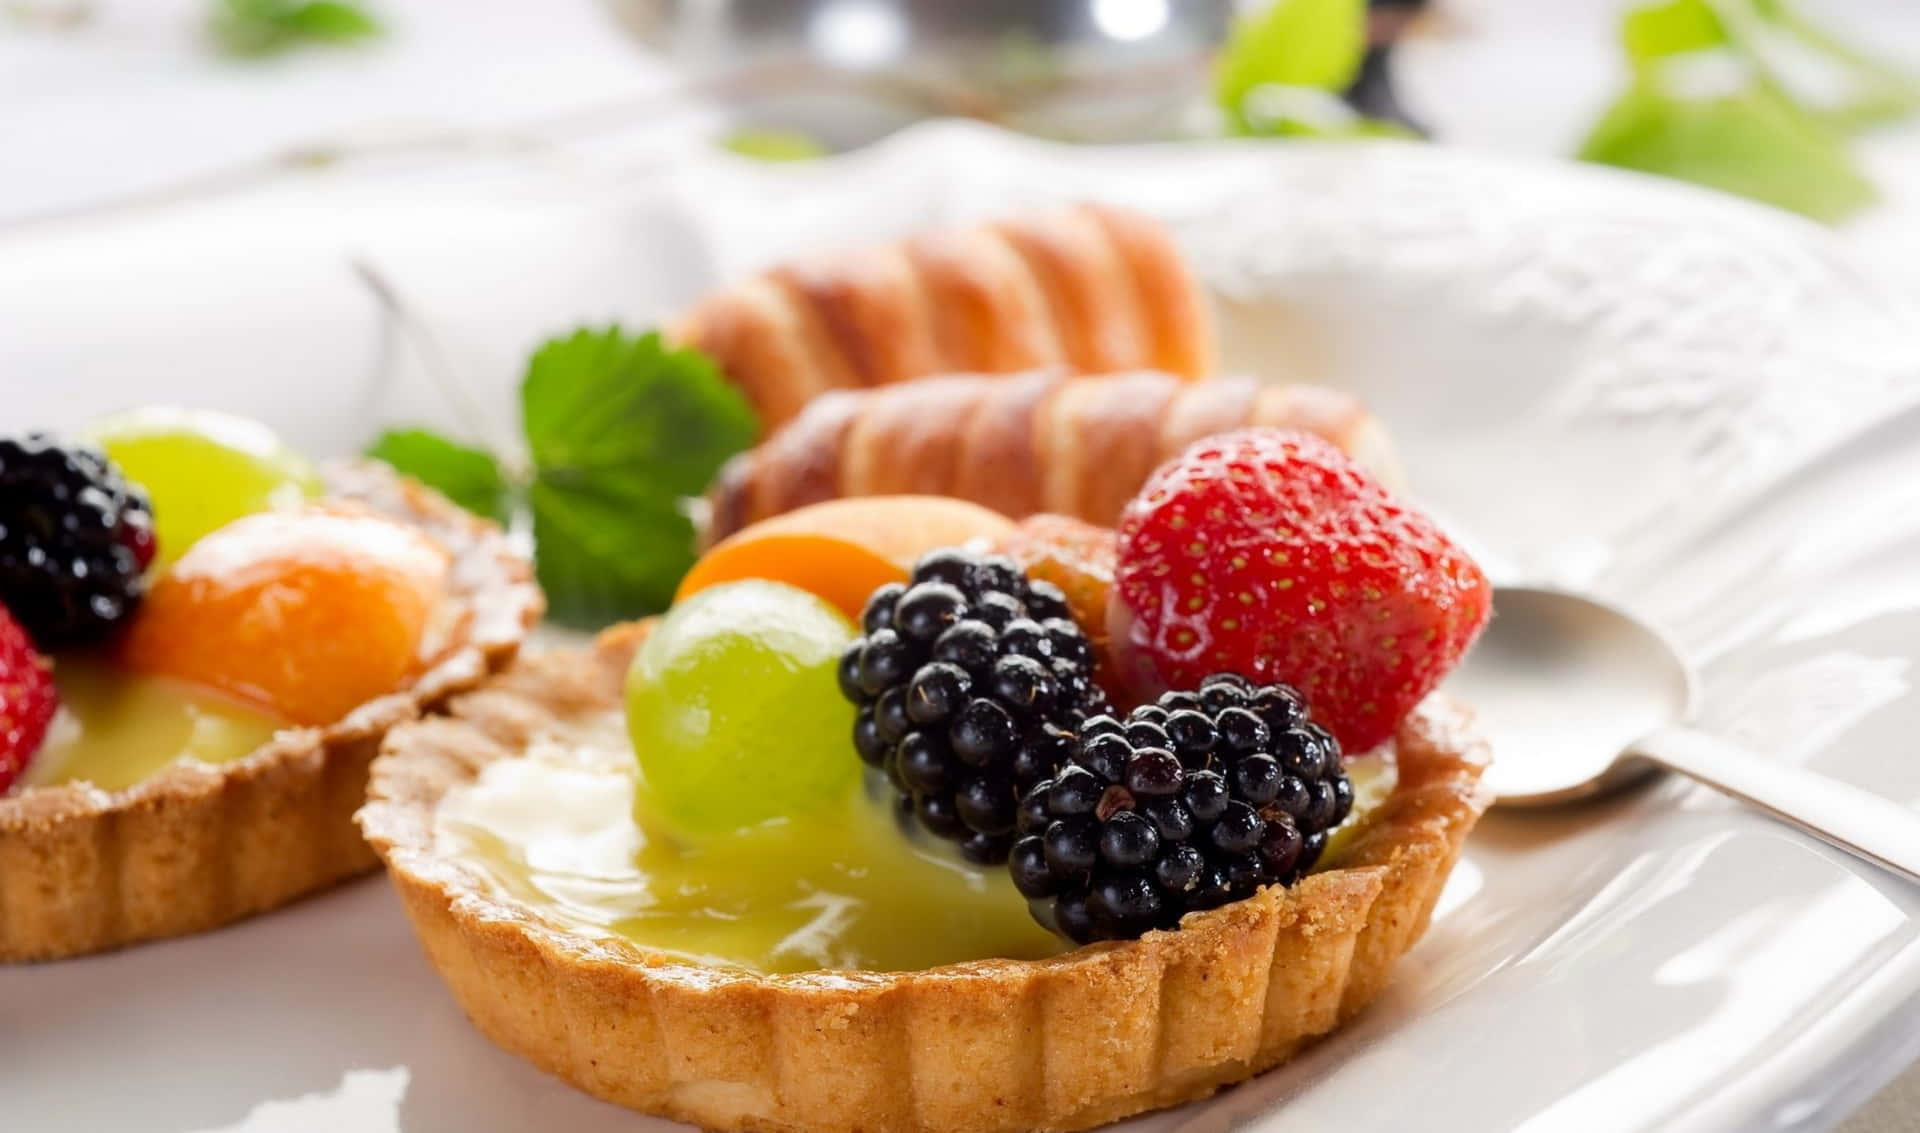 Two Fruit Tarts On A Plate With A Spoon